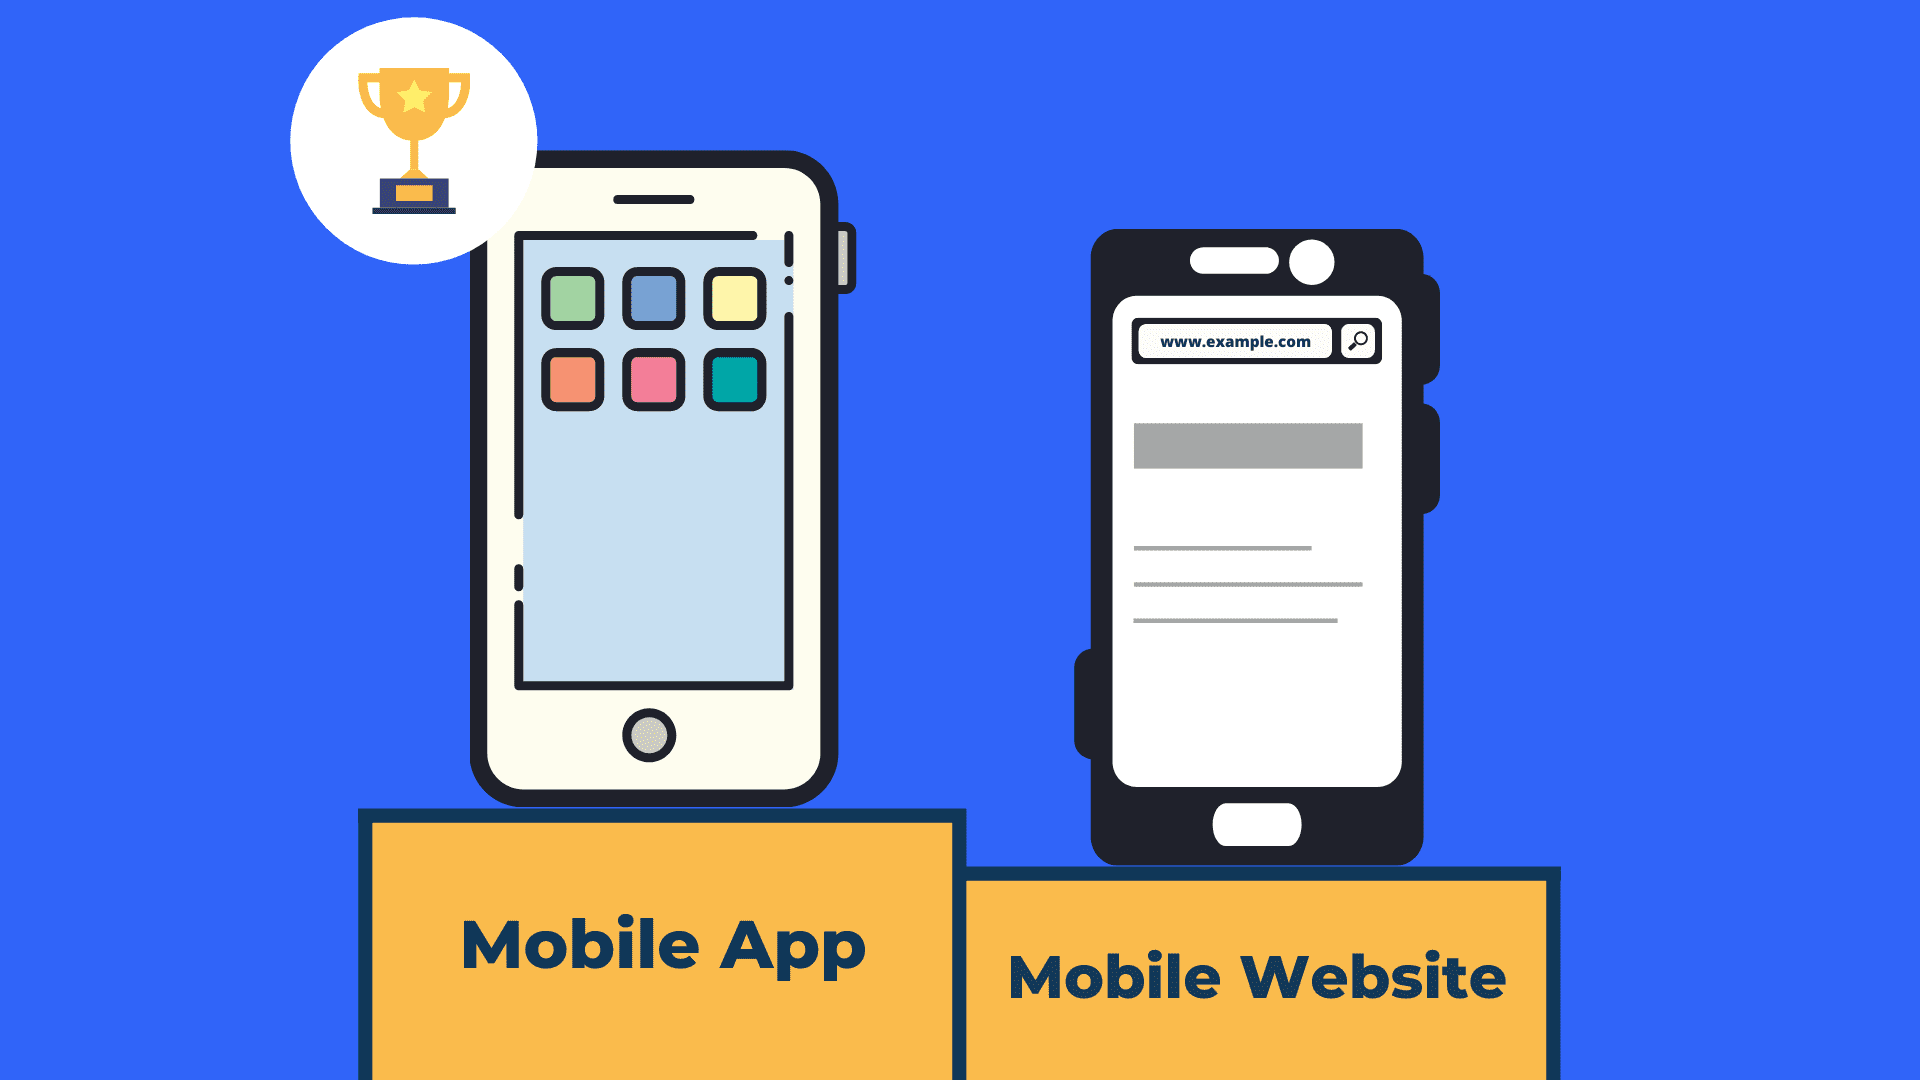 Mobile app vs mobile website - Which should you choose?